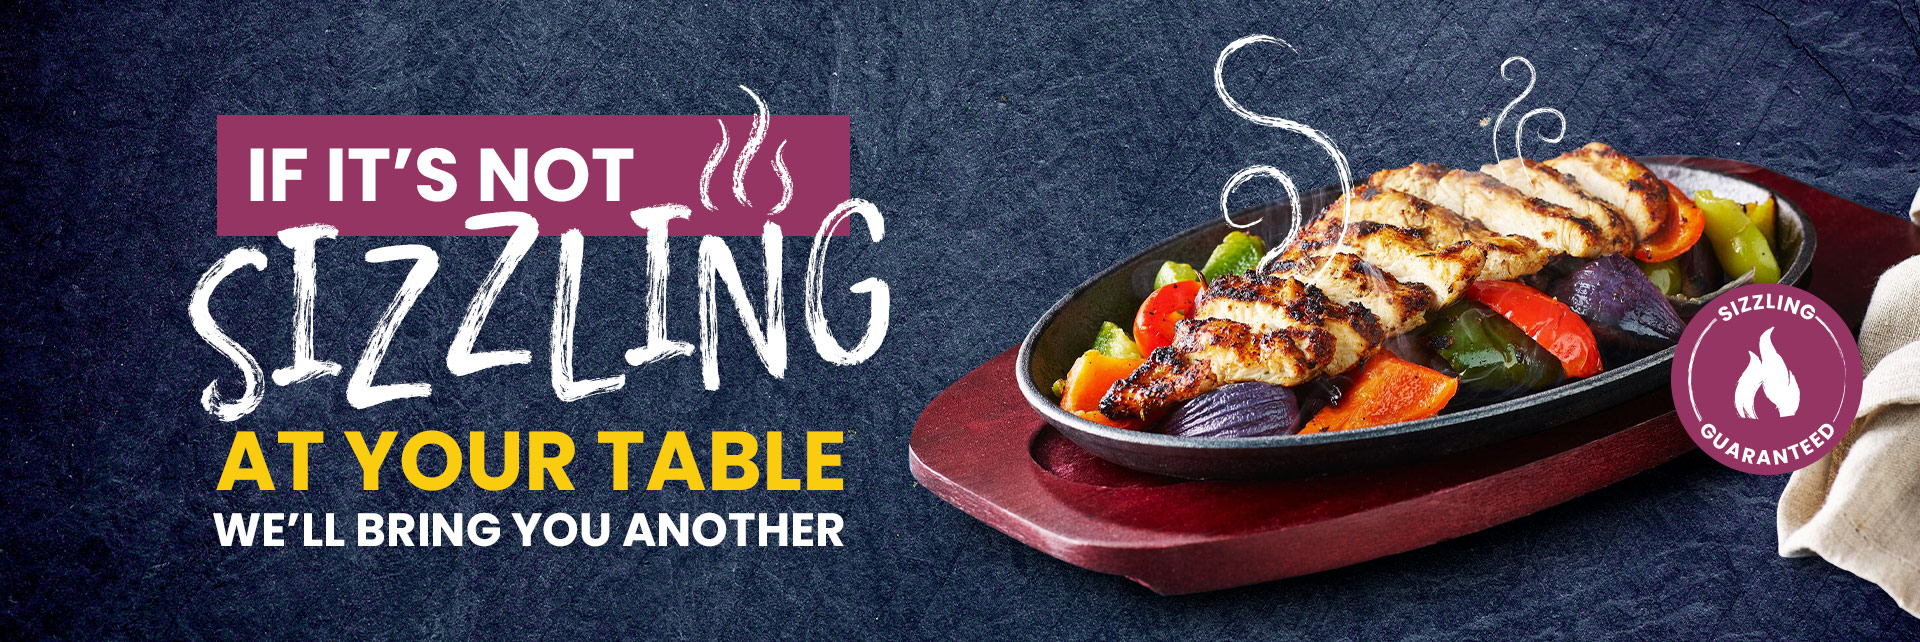 The Skillet Guarantee at Sizzling Pubs